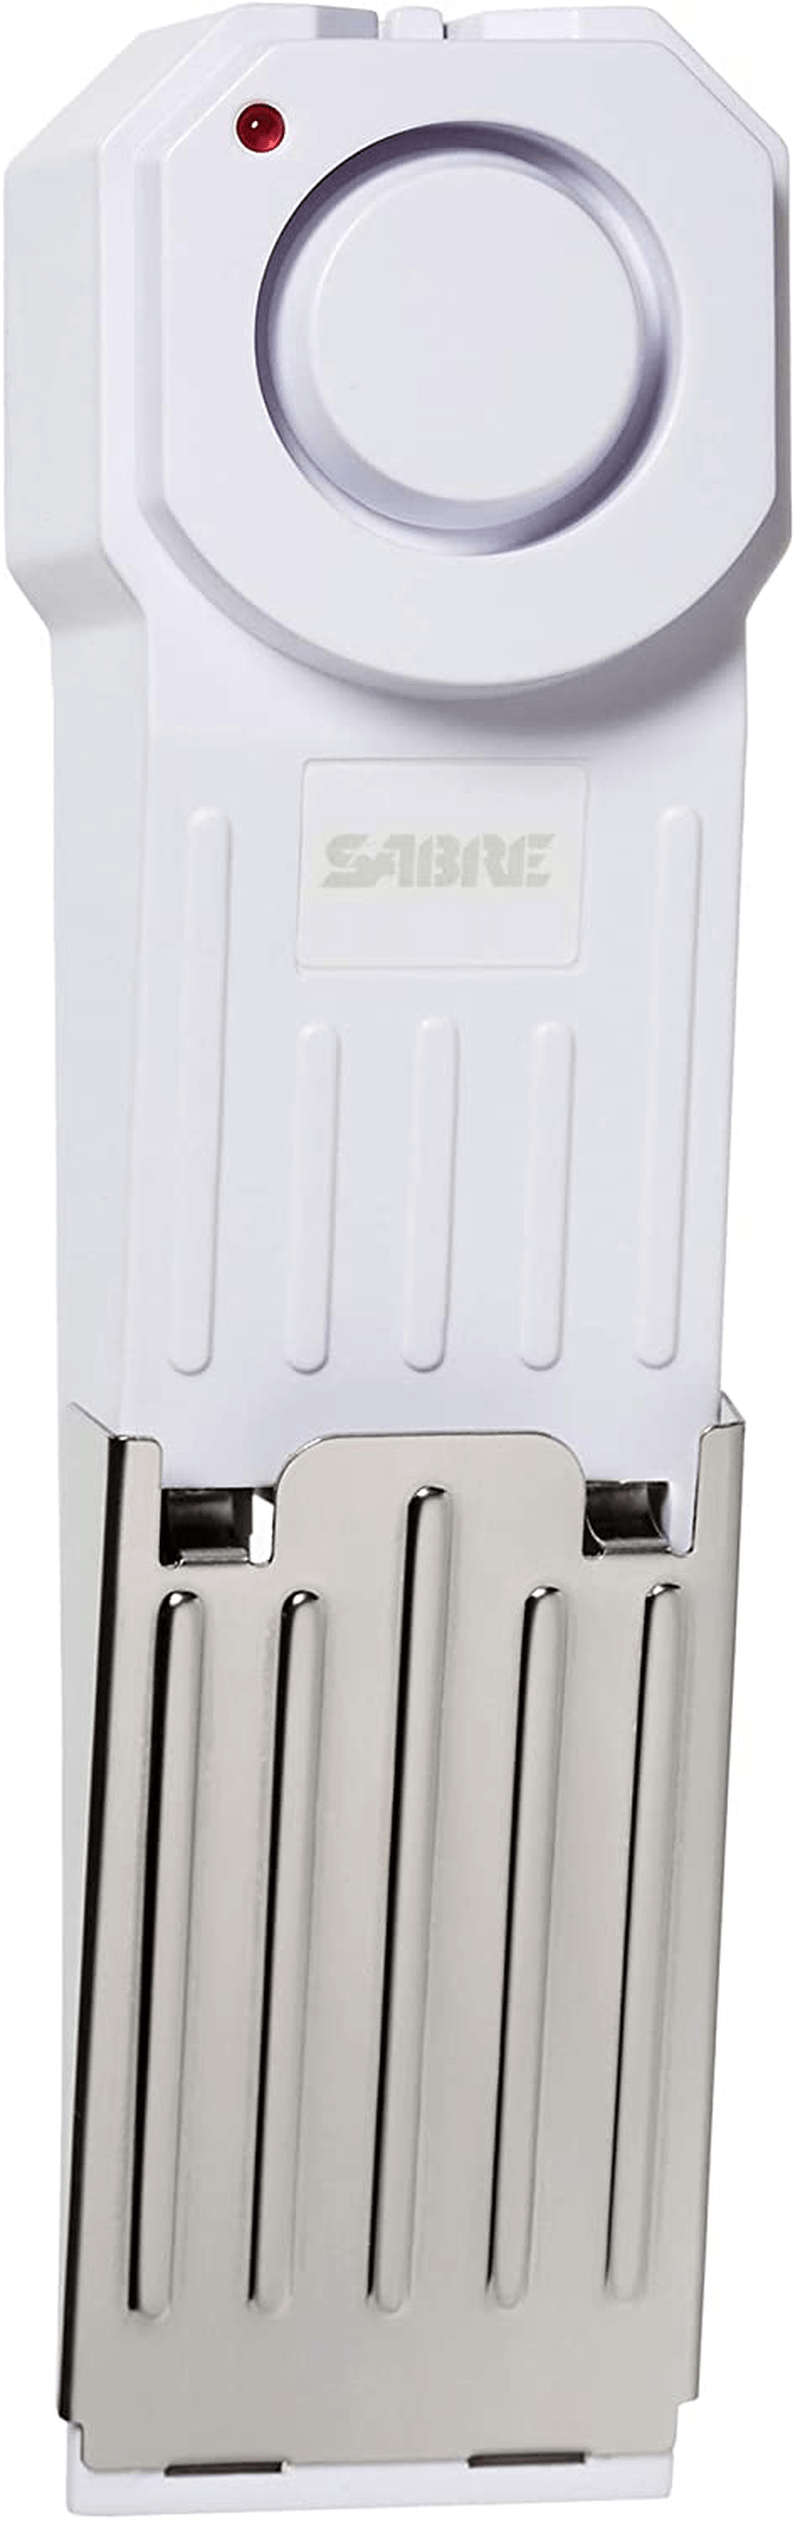 SABRE HS-DSA Wedge Door Stop Security Alarm with 120 dB Siren --- Great for Home, Travel, Apartment or Dorm Vehicles & Parts > Vehicle Parts & Accessories > Vehicle Safety & Security > Vehicle Alarms & Locks > Automotive Alarm Systems SABRE Security Wedge Door Stop (White)  